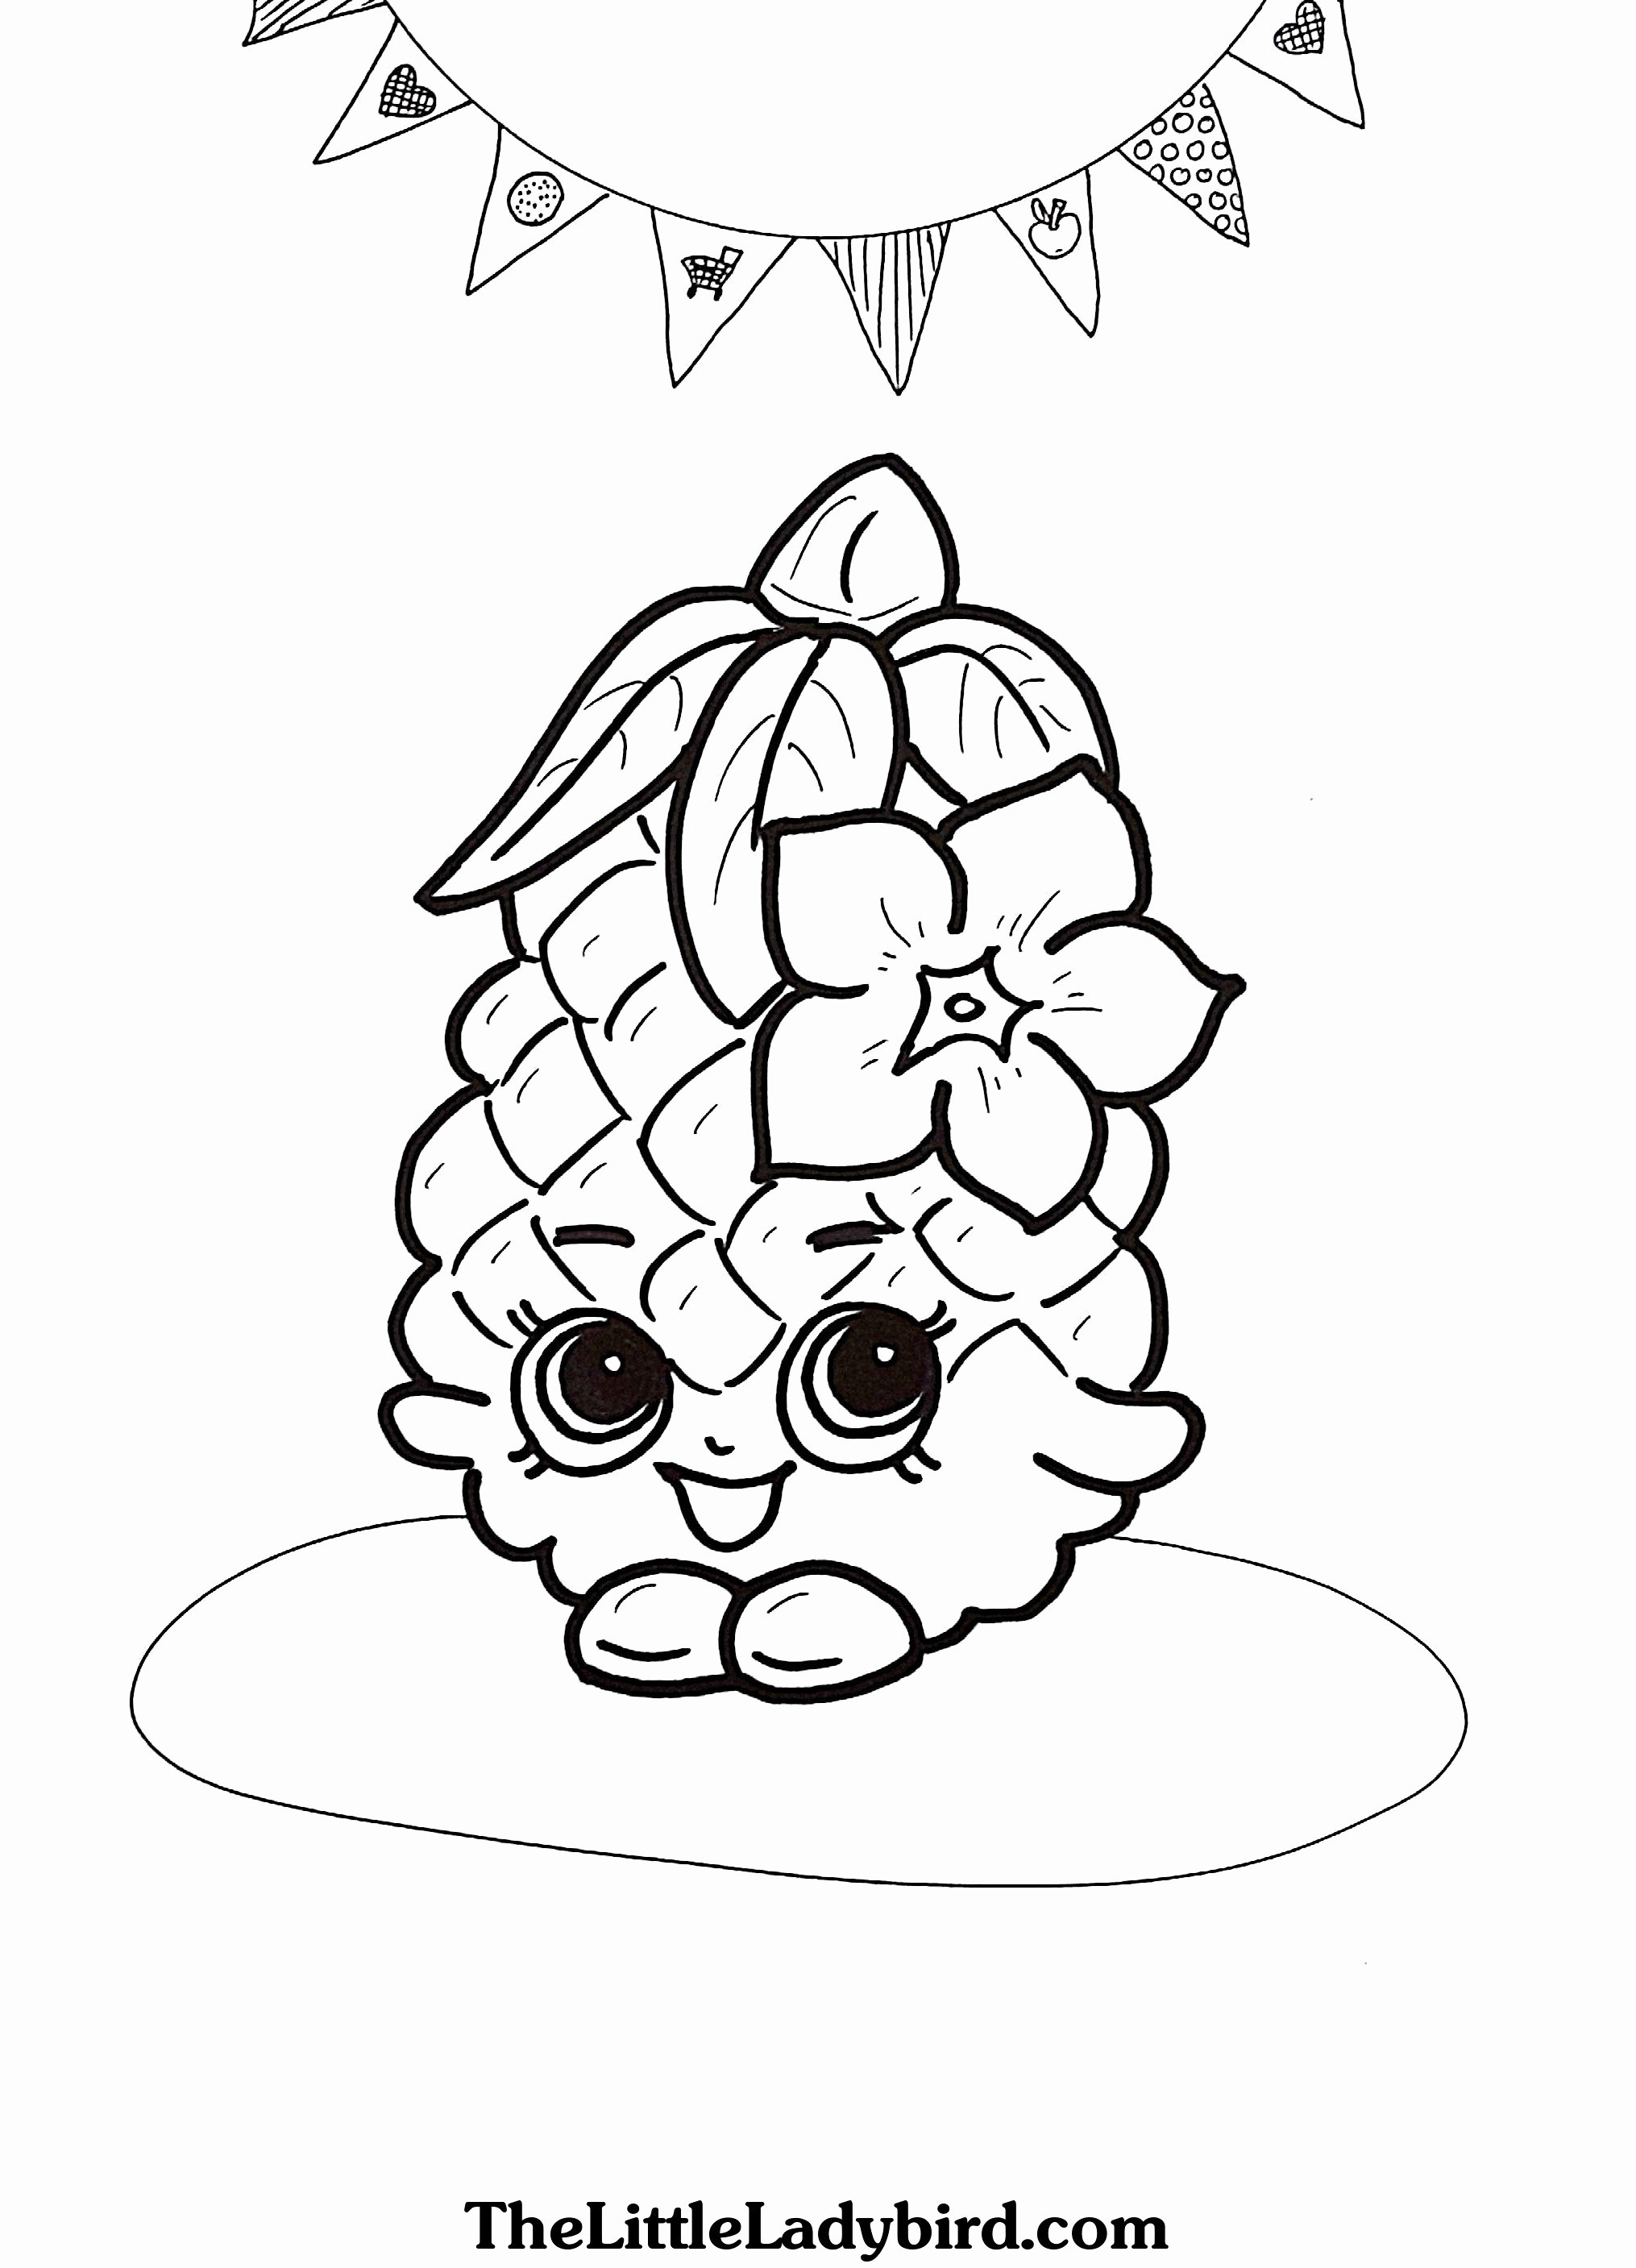 28 Cute Flower Vase Photos 2023 free download flower vase photos of pretty coloring pages of flowers fresh best vases flower vase with regard to best vases flower vase coloring page pages flowers in a top i 0d